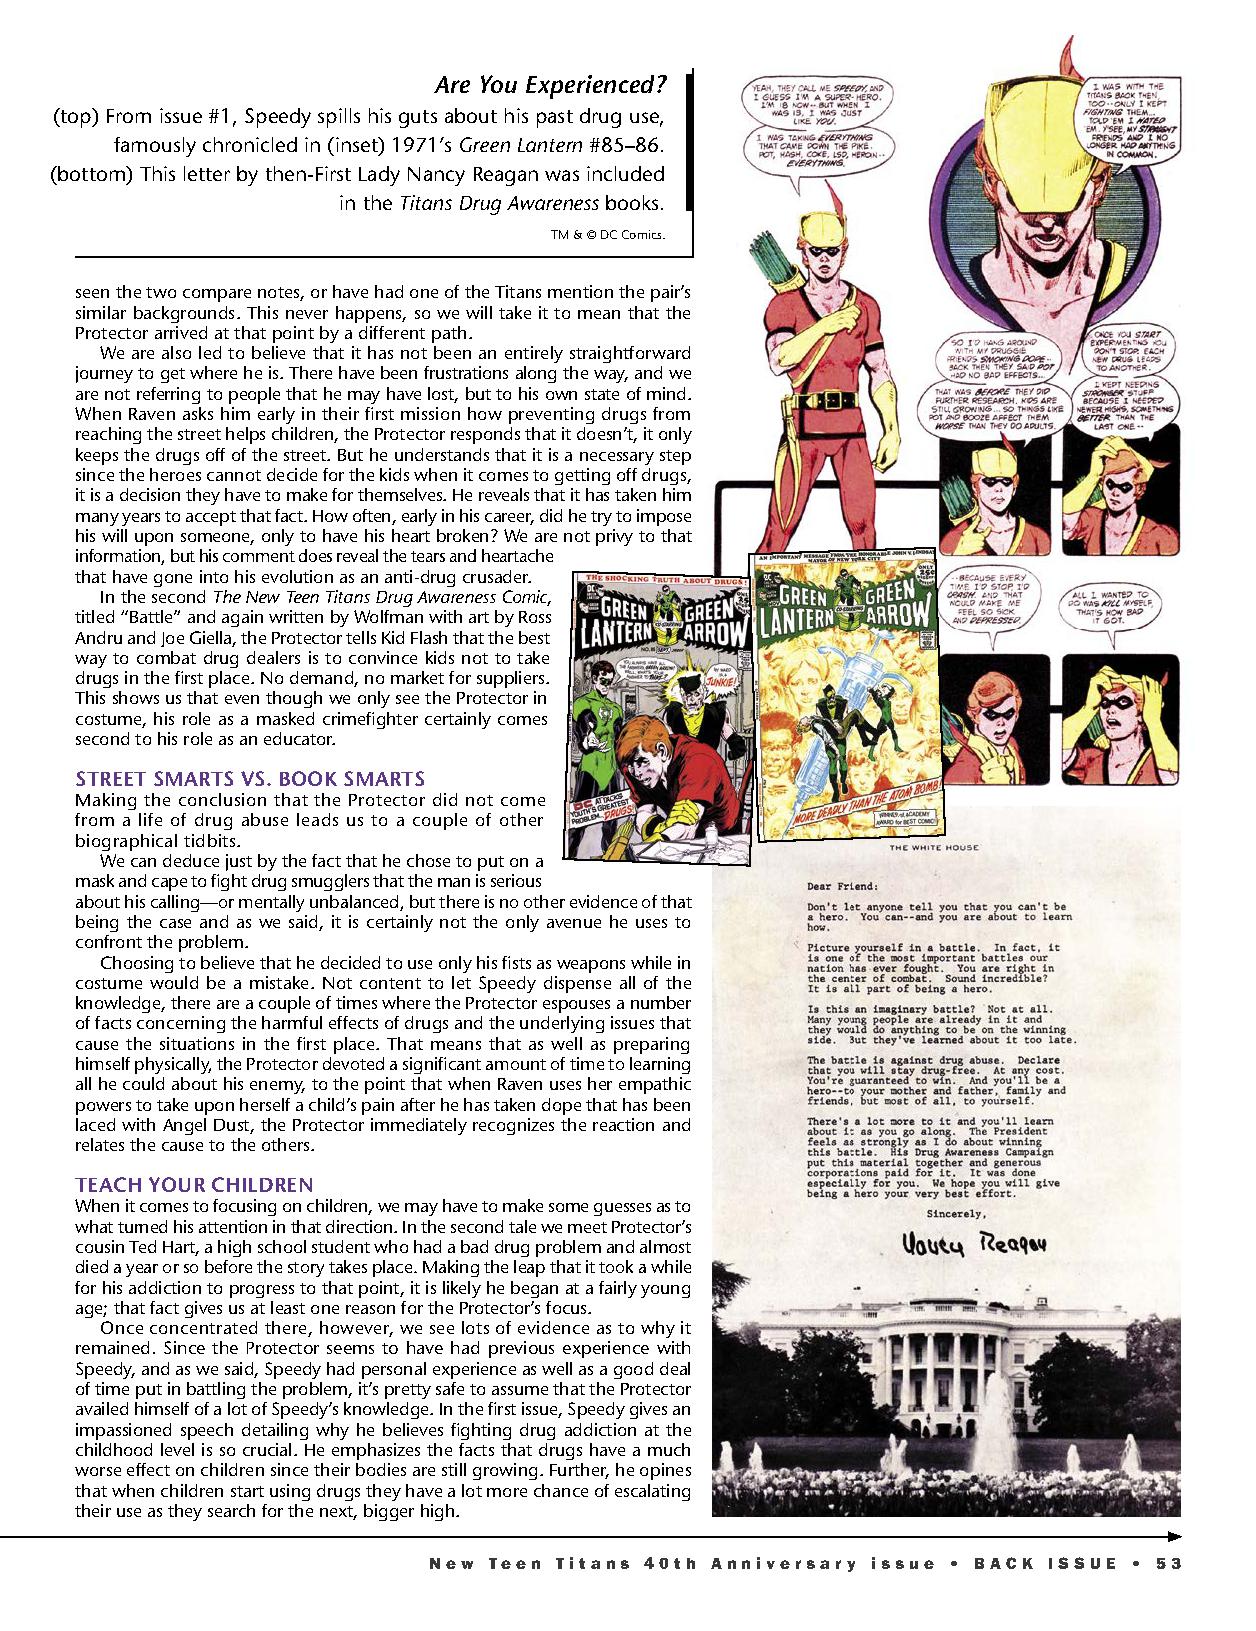 Read online Back Issue comic -  Issue #122 - 55